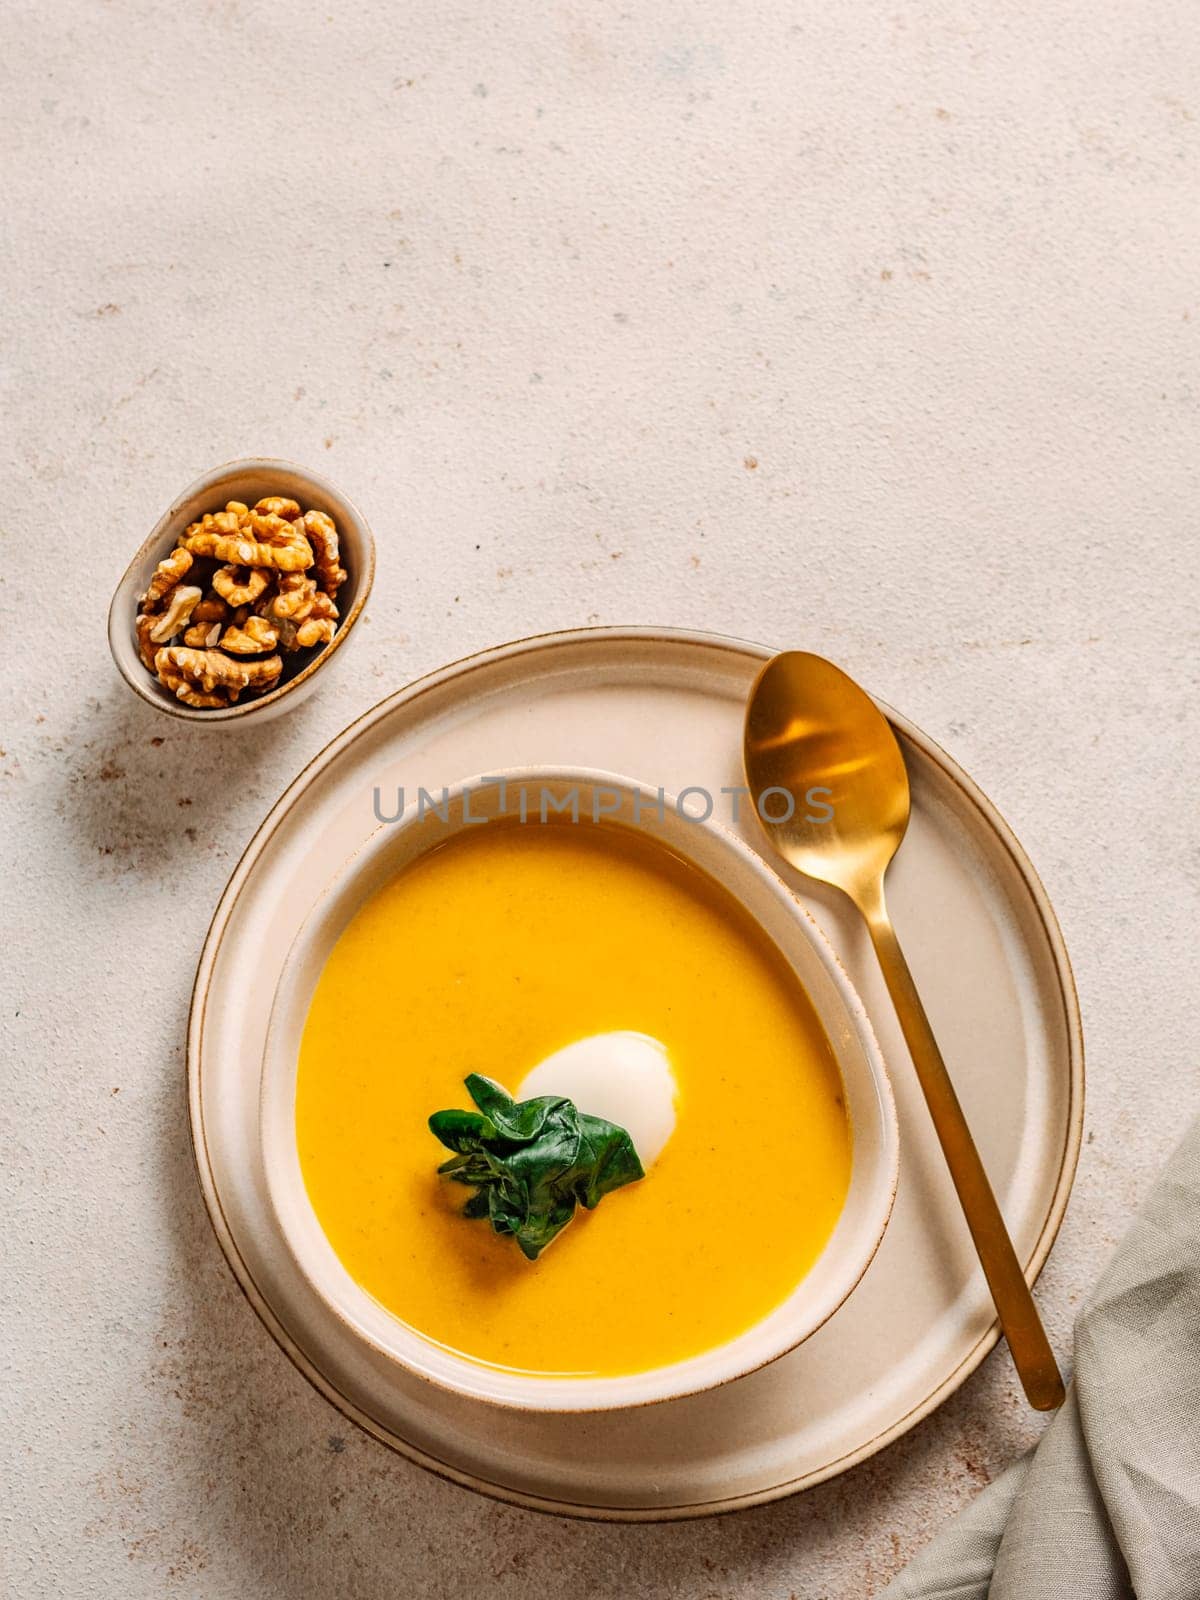 Pumpkin cream-soup served spinach. Tasty Homemade Pumpkin, Sweet Potato or Carrot Soup in Bowl on Neutral Pastel Background. Cozy autumn comfort food. Copy space, vertical. Top view